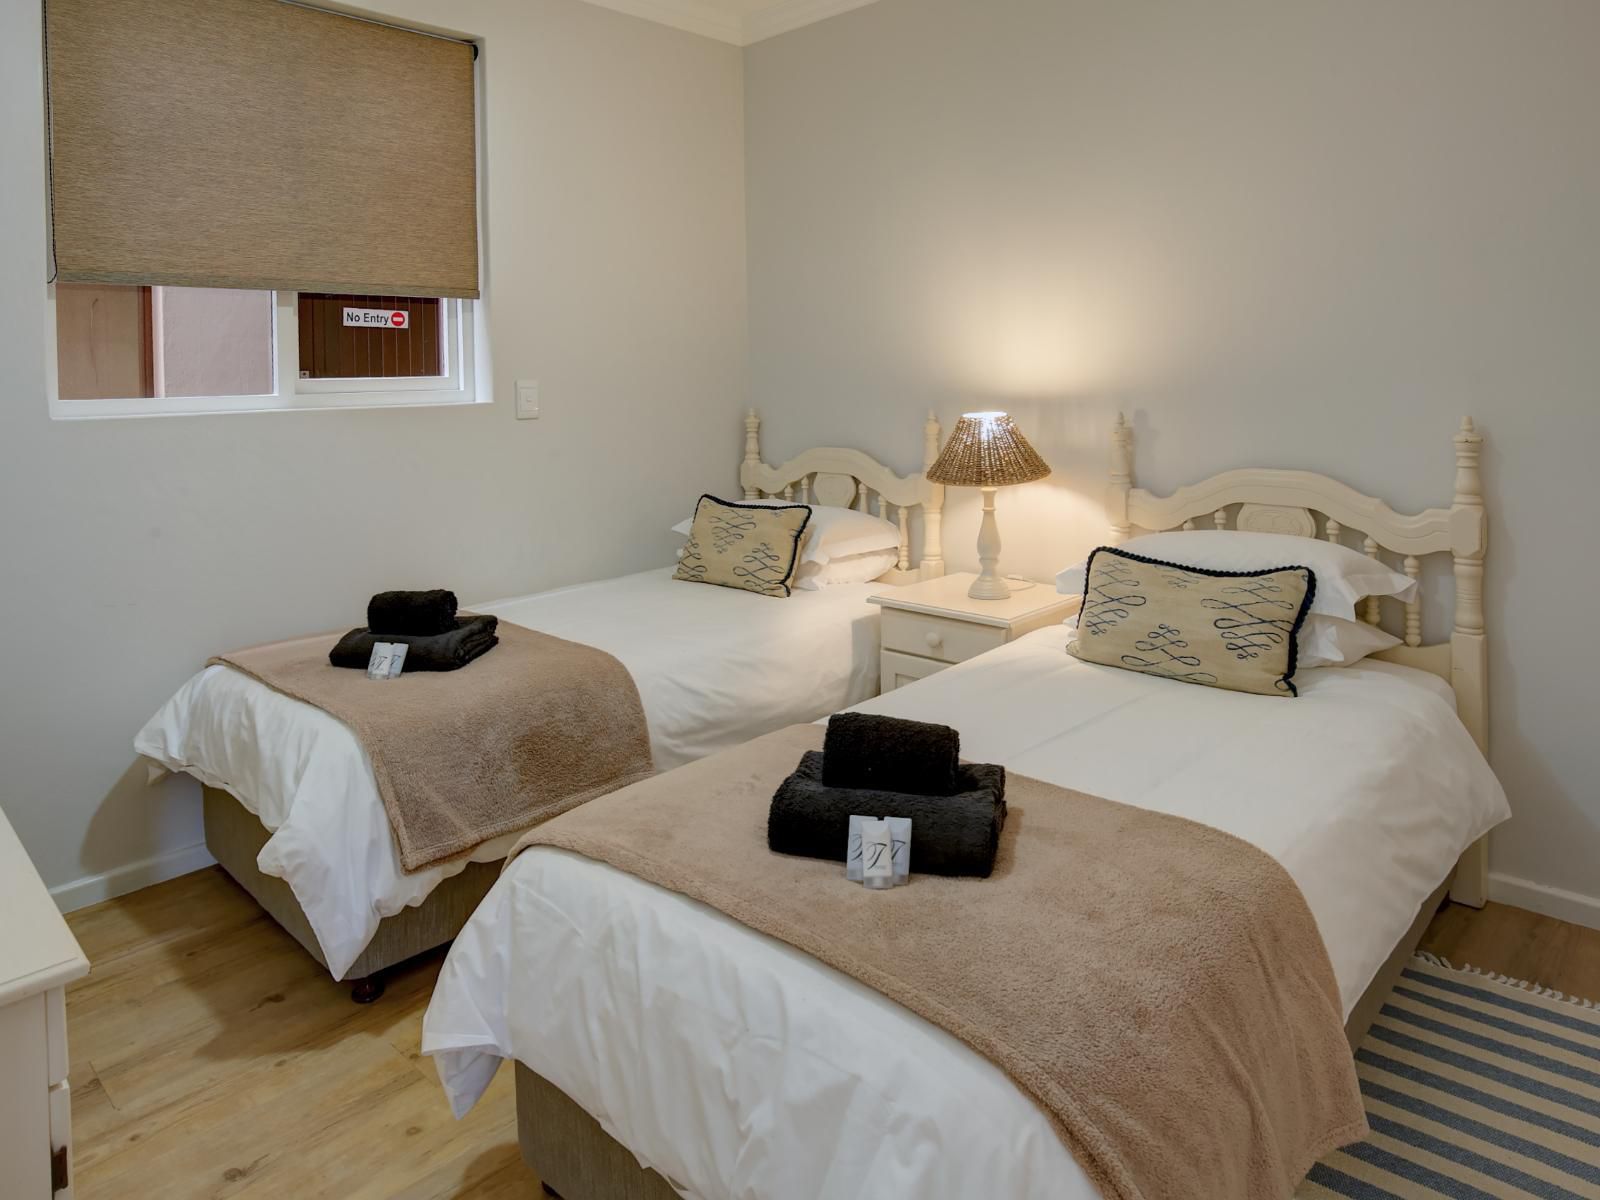 Oppiesee Selfcatering Apartments Herolds Bay Western Cape South Africa Bedroom